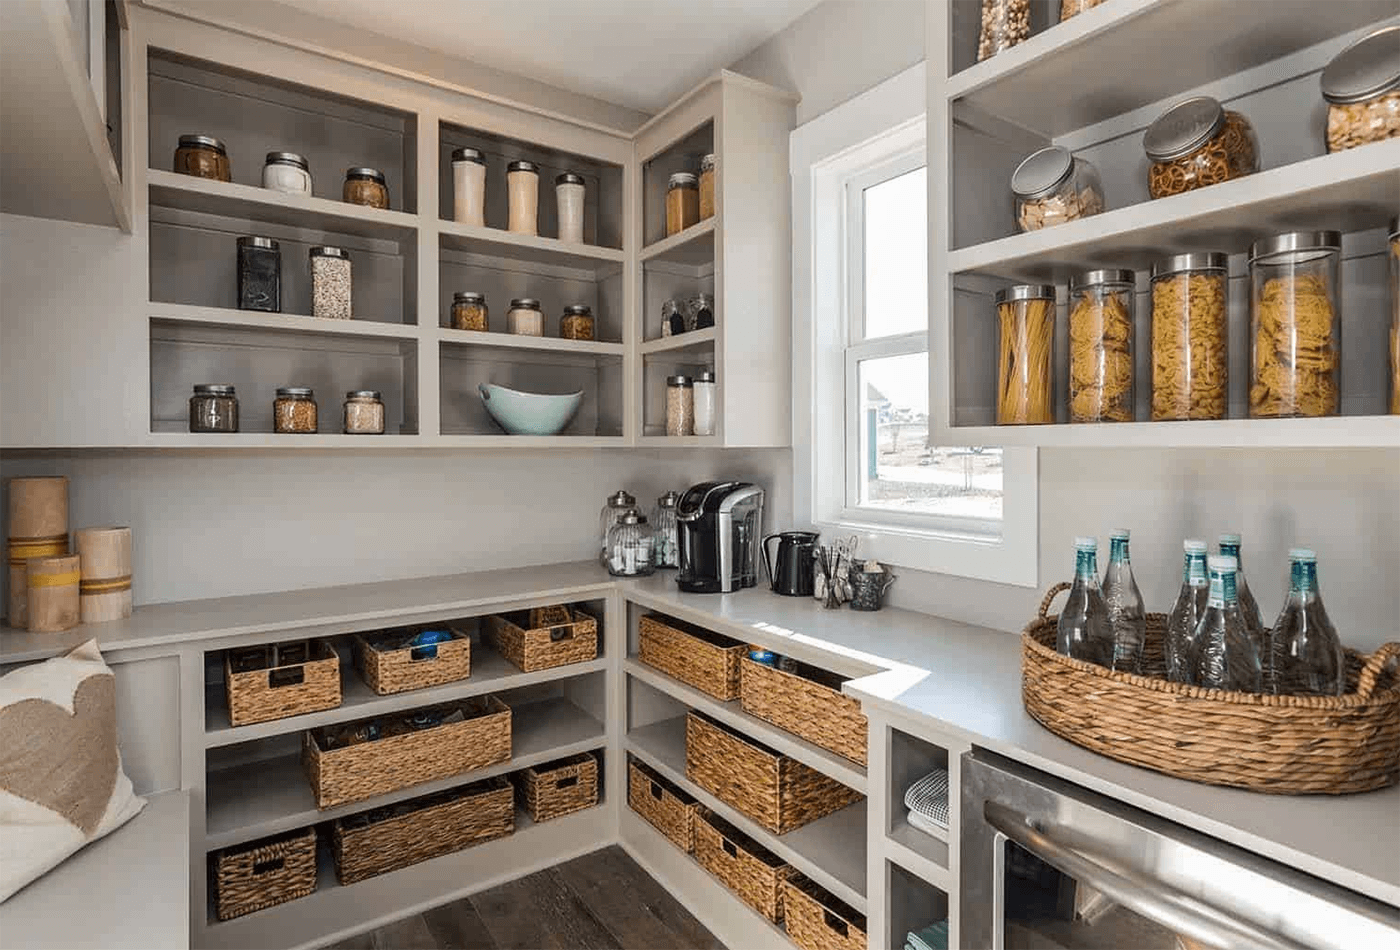 31 Ways to Maximize Your Pantry Space  Small pantry organization, Kitchen organization  pantry, Small pantry